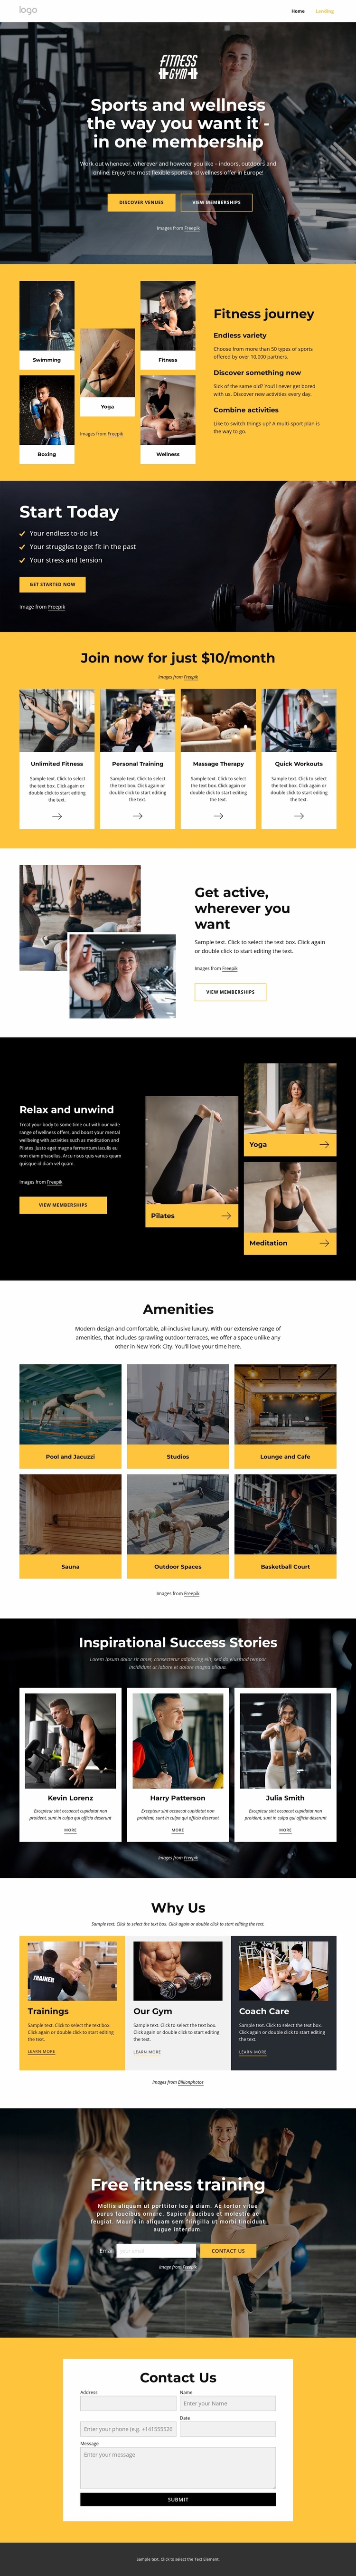 Gym, swimming, fitness classes Website Template